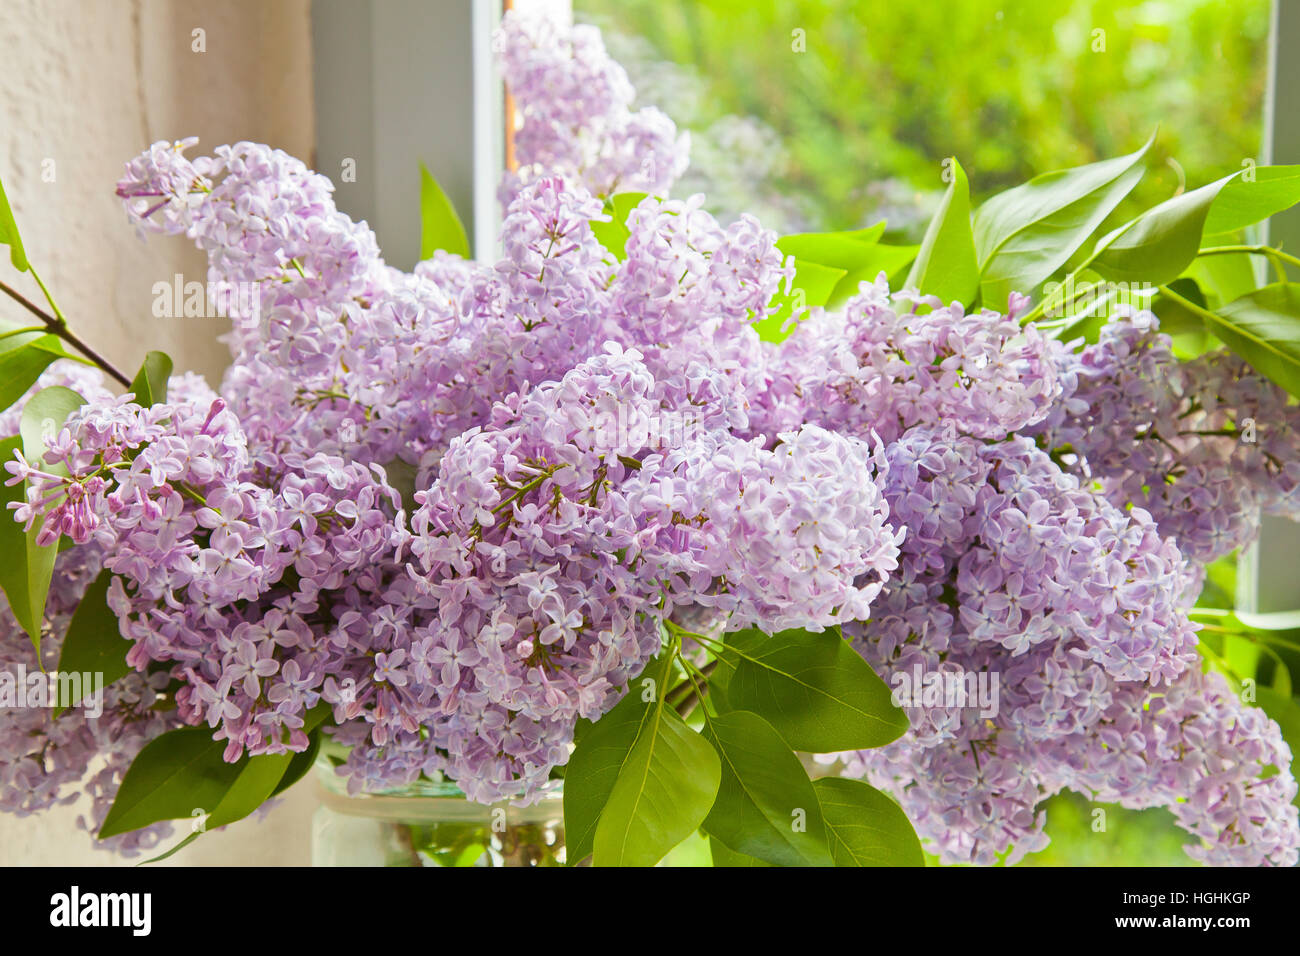 Lilac bouquet 'Syringa vulgaris' in a house (Europe, France) Stock Photo